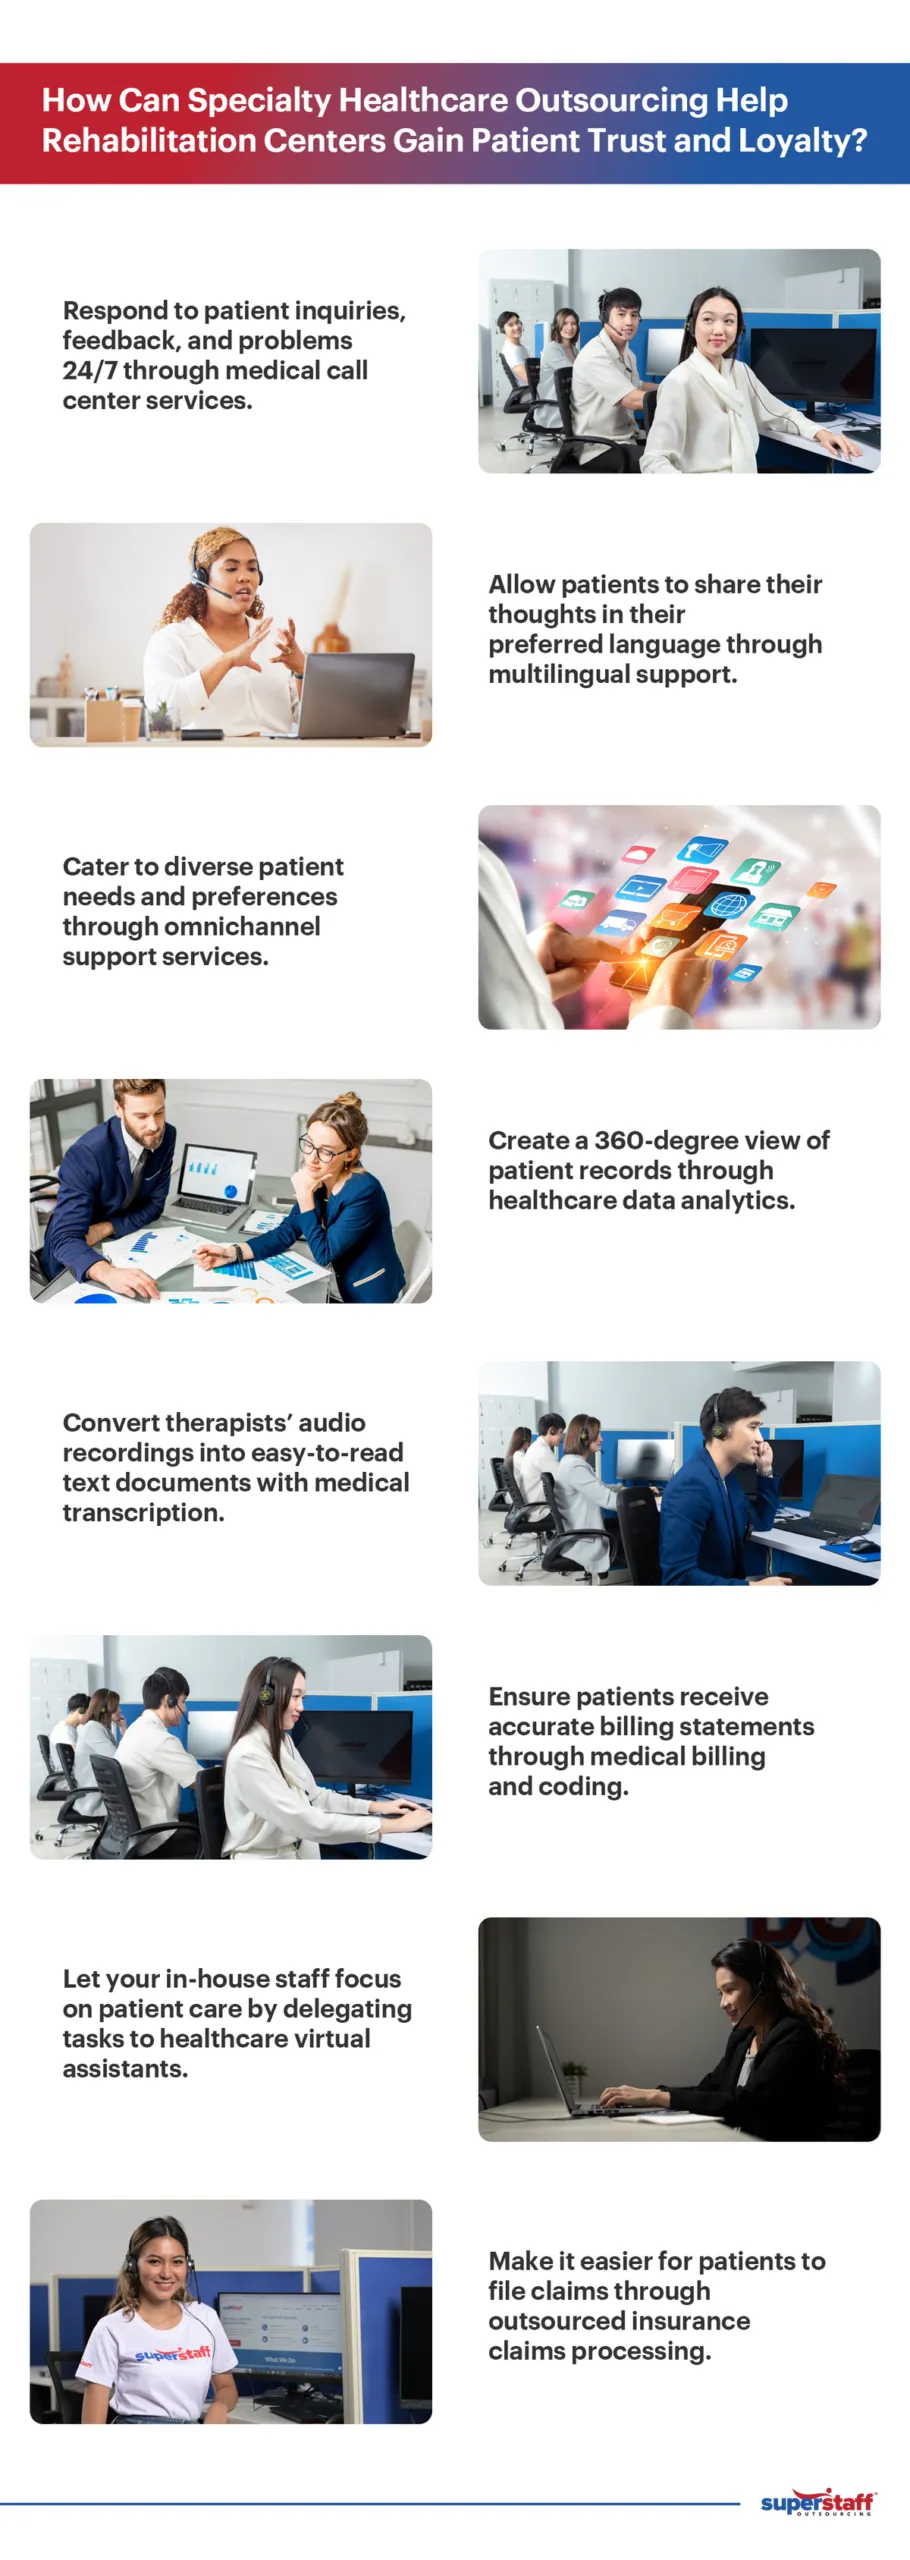 An infographic that tackles how specialty healthcare outsourcing can help rehabilitation centers gain patient trust and loyalty.